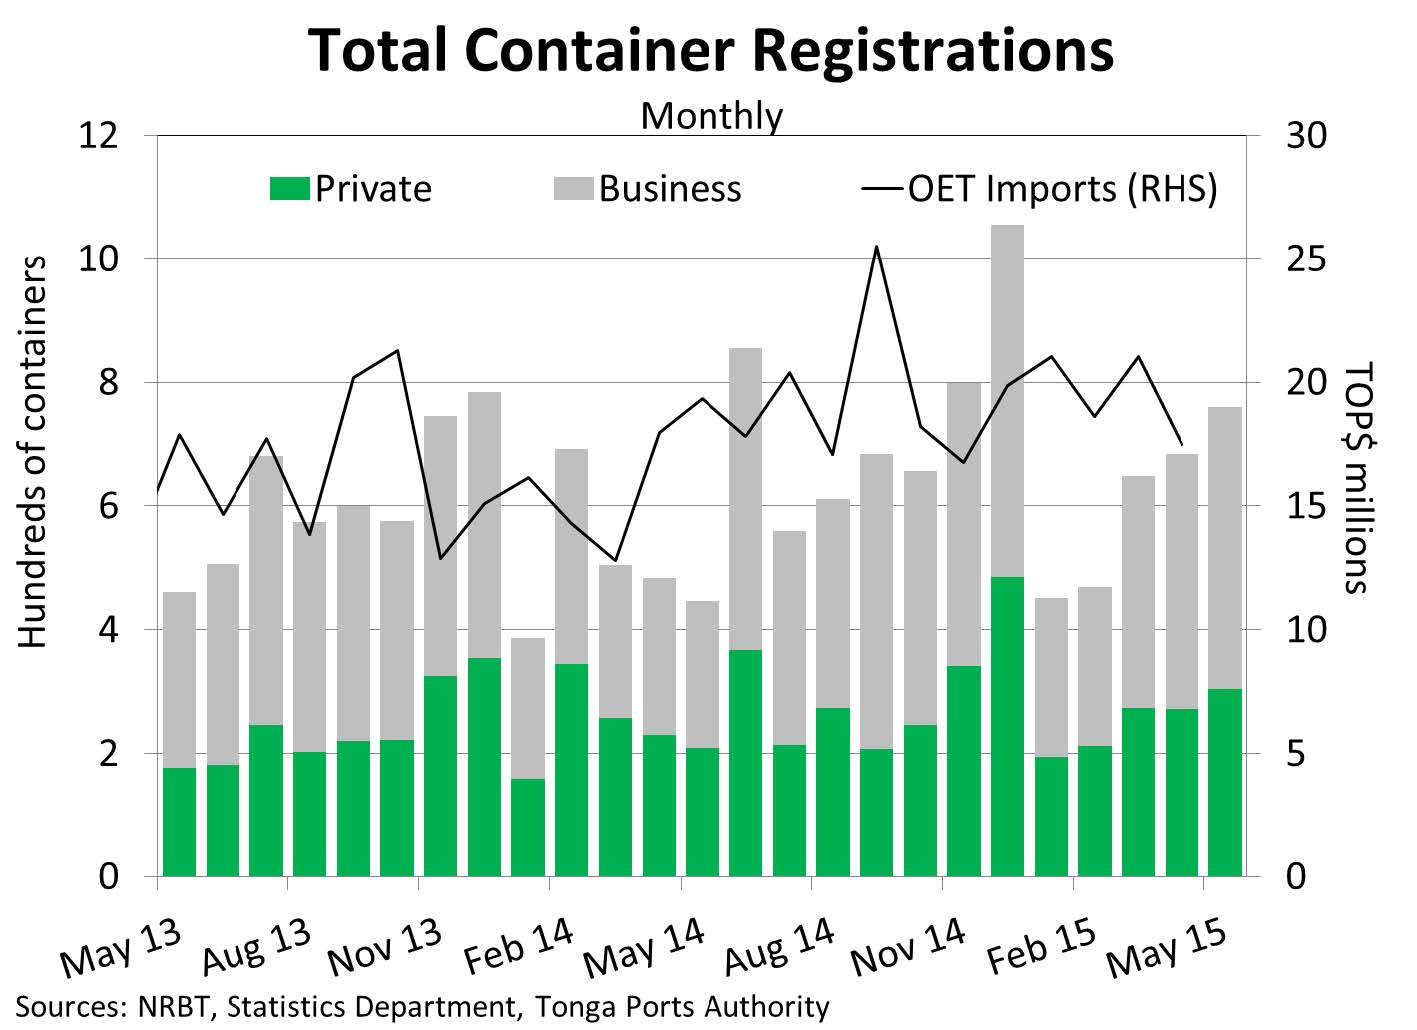 ContainerRegistration May15